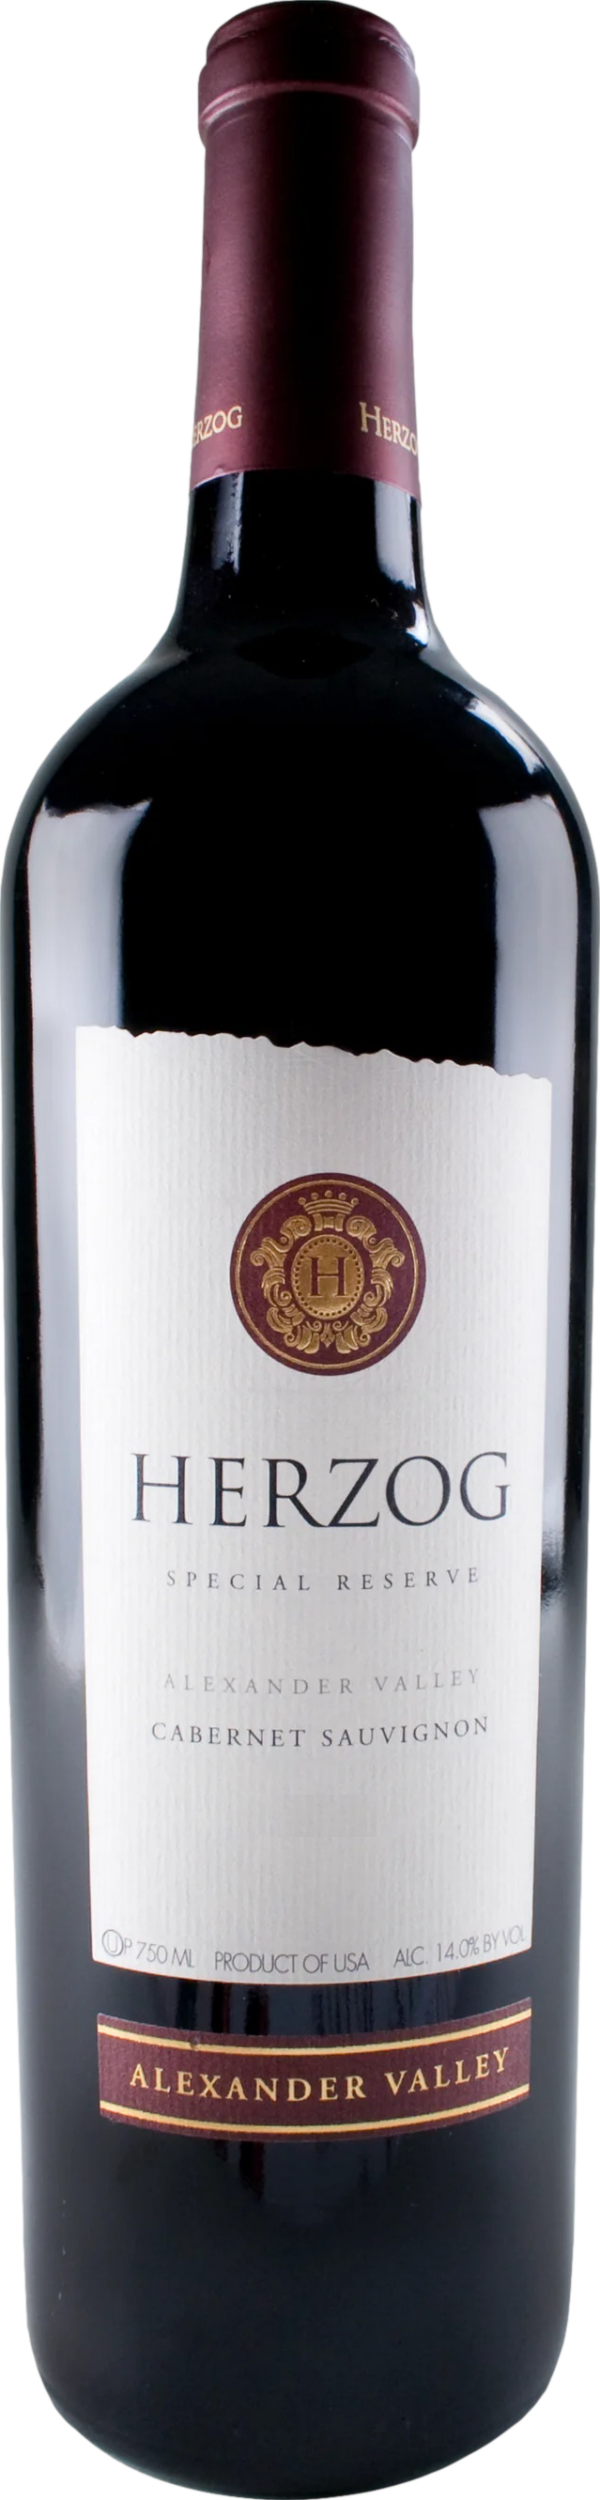 Product image of Herzog Alexander Valley Special Reserve Cabernet Sauvignon 2020 from 8wines